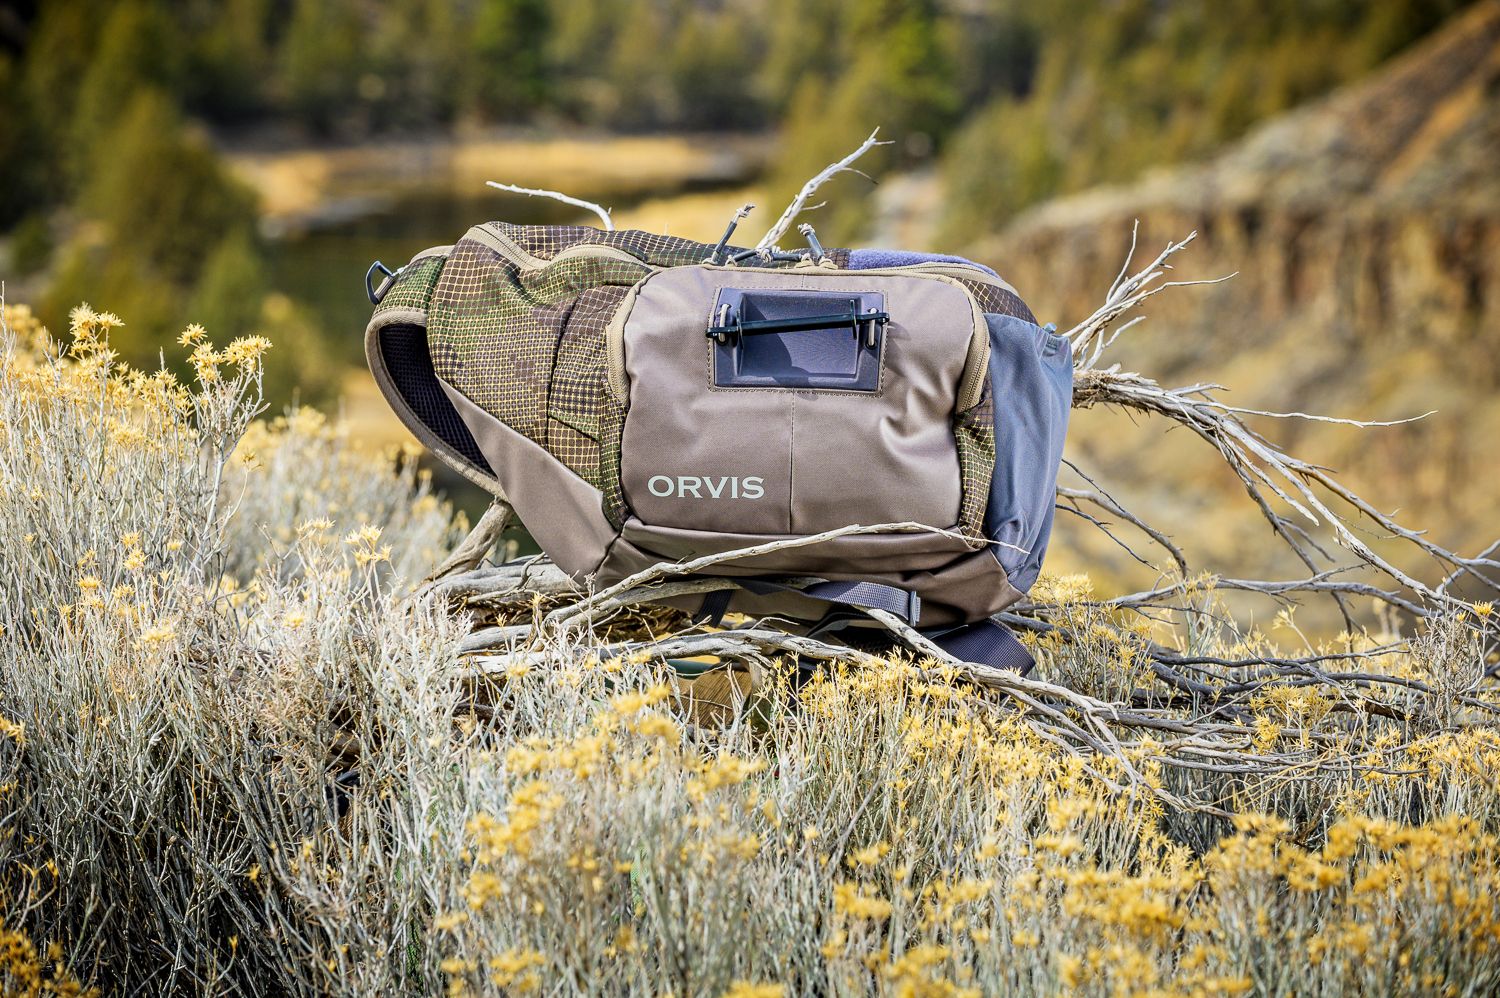 Orvis Sling Pack - Fin & Fire Fly Shop